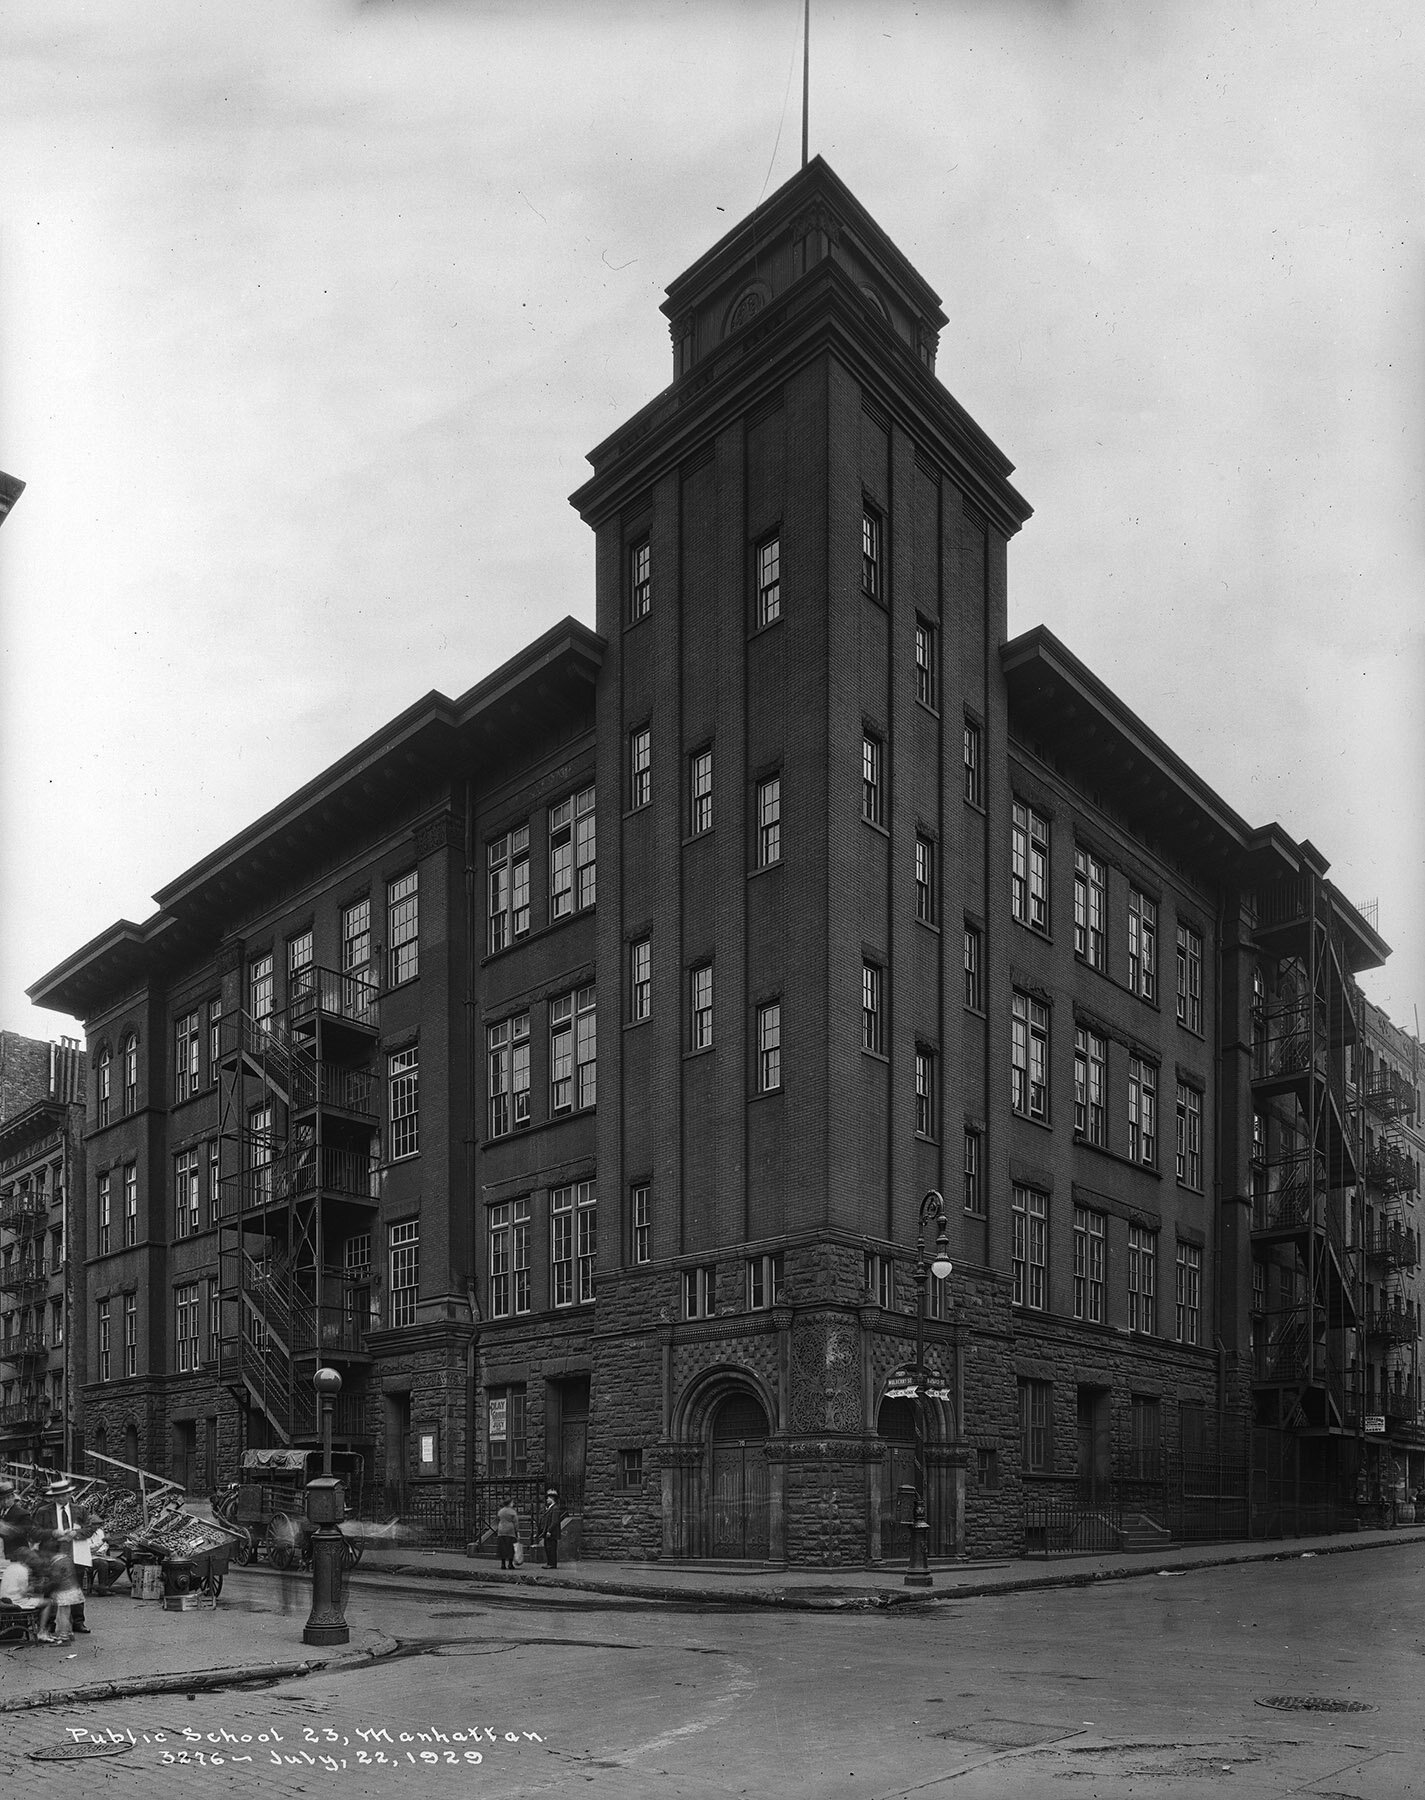 PS 23 Manhattan, July 22, 1929. BOE 3276, NYC Board of Education Collection, NYC Municipal Archives.